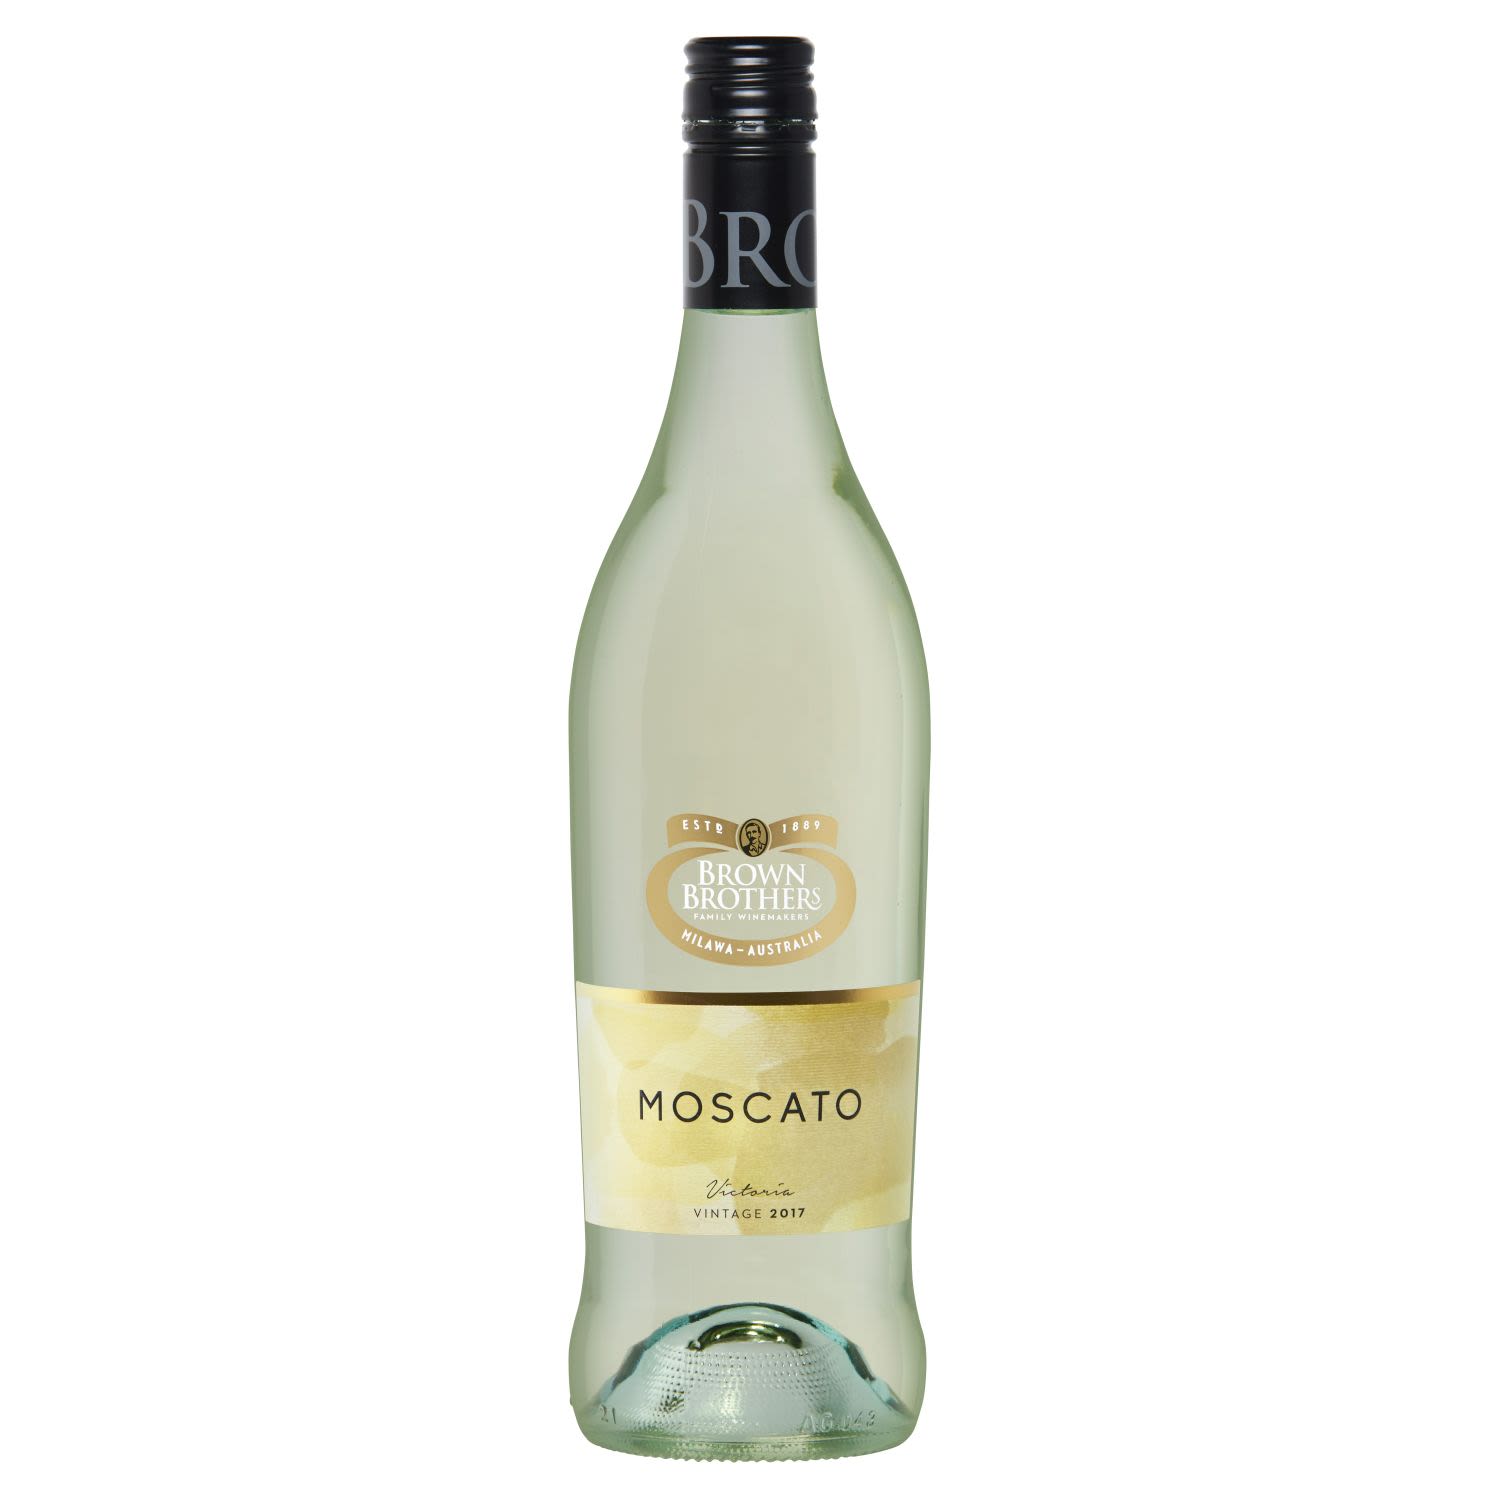 Brown Brothers Moscato is Australia’s favourite white wine. This current release is a light straw colour with some youthful, green tinges, while the nose is lifted with aromas of musk, citrus and freshly crushed grapes. In the mouth the wine is alive with a vibrant and mouth-filling fruit flavour.  This lively and fresh wine has a mild frizzante bubble on the finish.<br /> <br />Alcohol Volume: 5.30%<br /><br />Pack Format: Bottle<br /><br />Standard Drinks: 3.1<br /><br />Pack Type: Bottle<br /><br />Country of Origin: Australia<br /><br />Region: Victoria<br /><br />Vintage: Various<br />